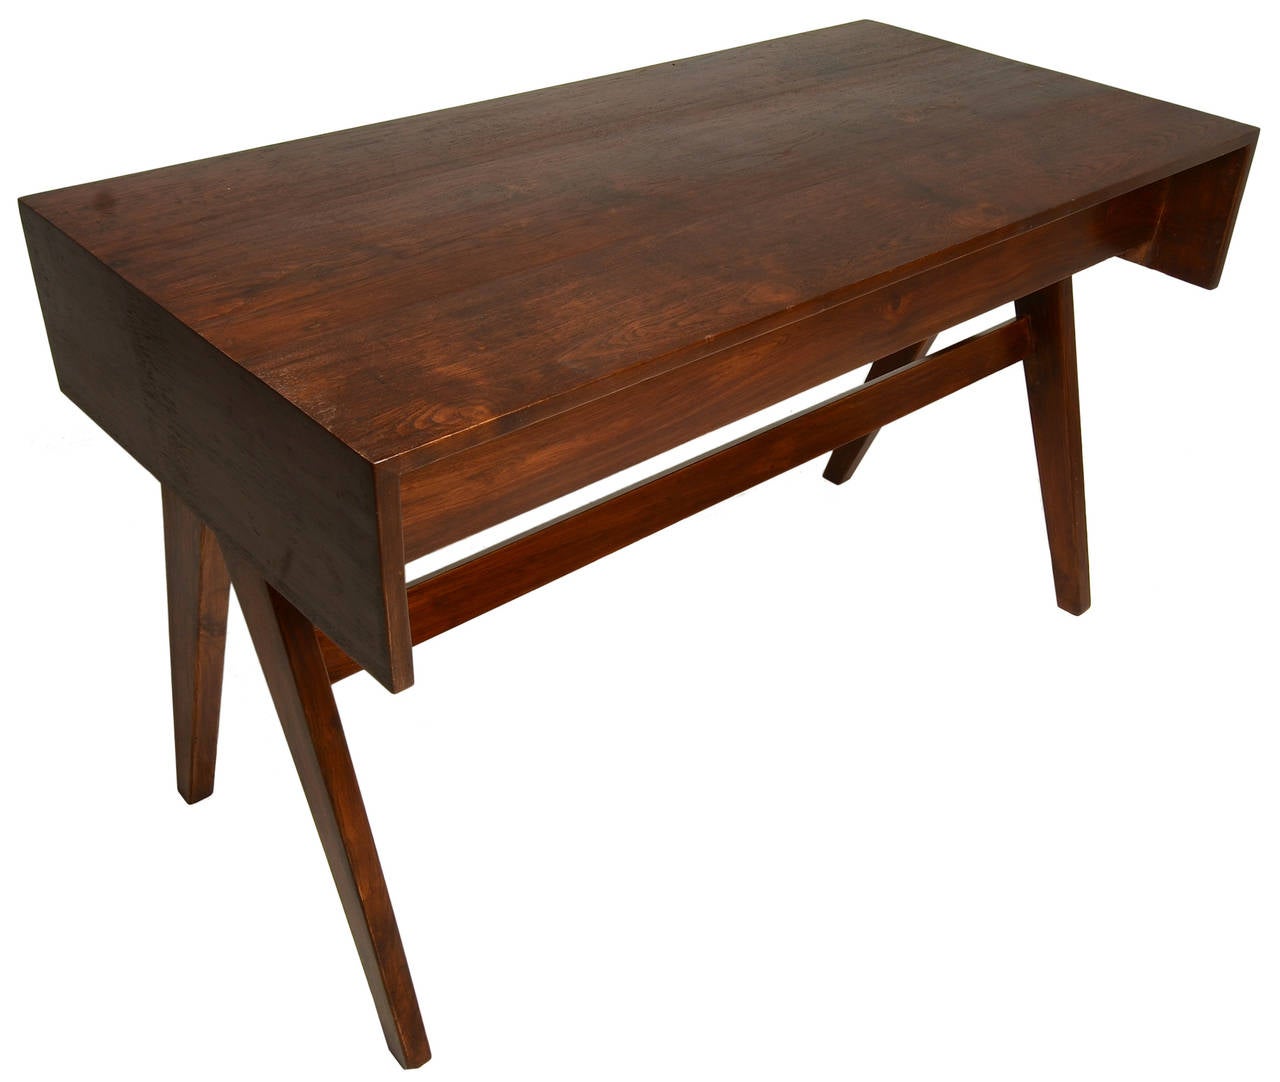 A great example of the small personal Pierre Jeanneret desk designed for the city of Chandigarh in the mid-1950s.
A terrific scale and pure design and form.
Works well as a wide console as well.